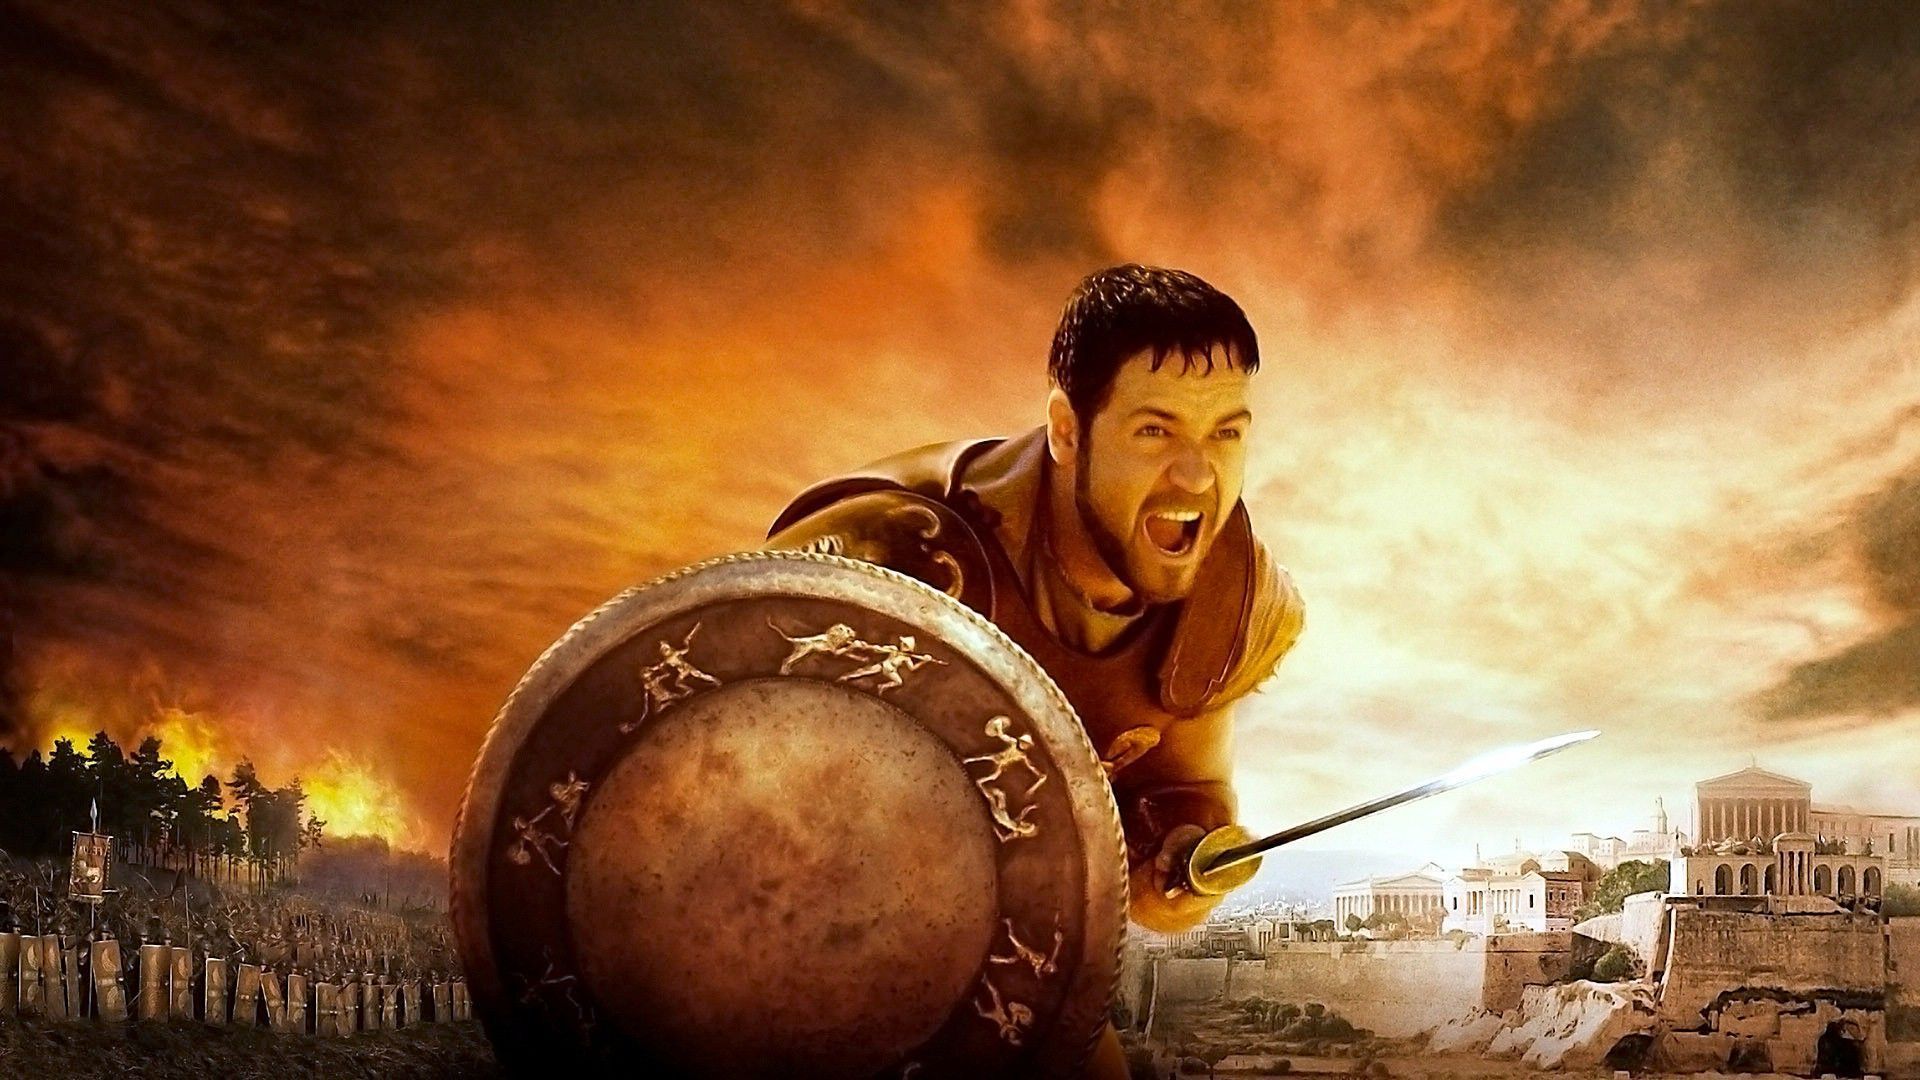 Gladiator Movie HD Wallpaper, Gladiator Pictures, New Wallpapers